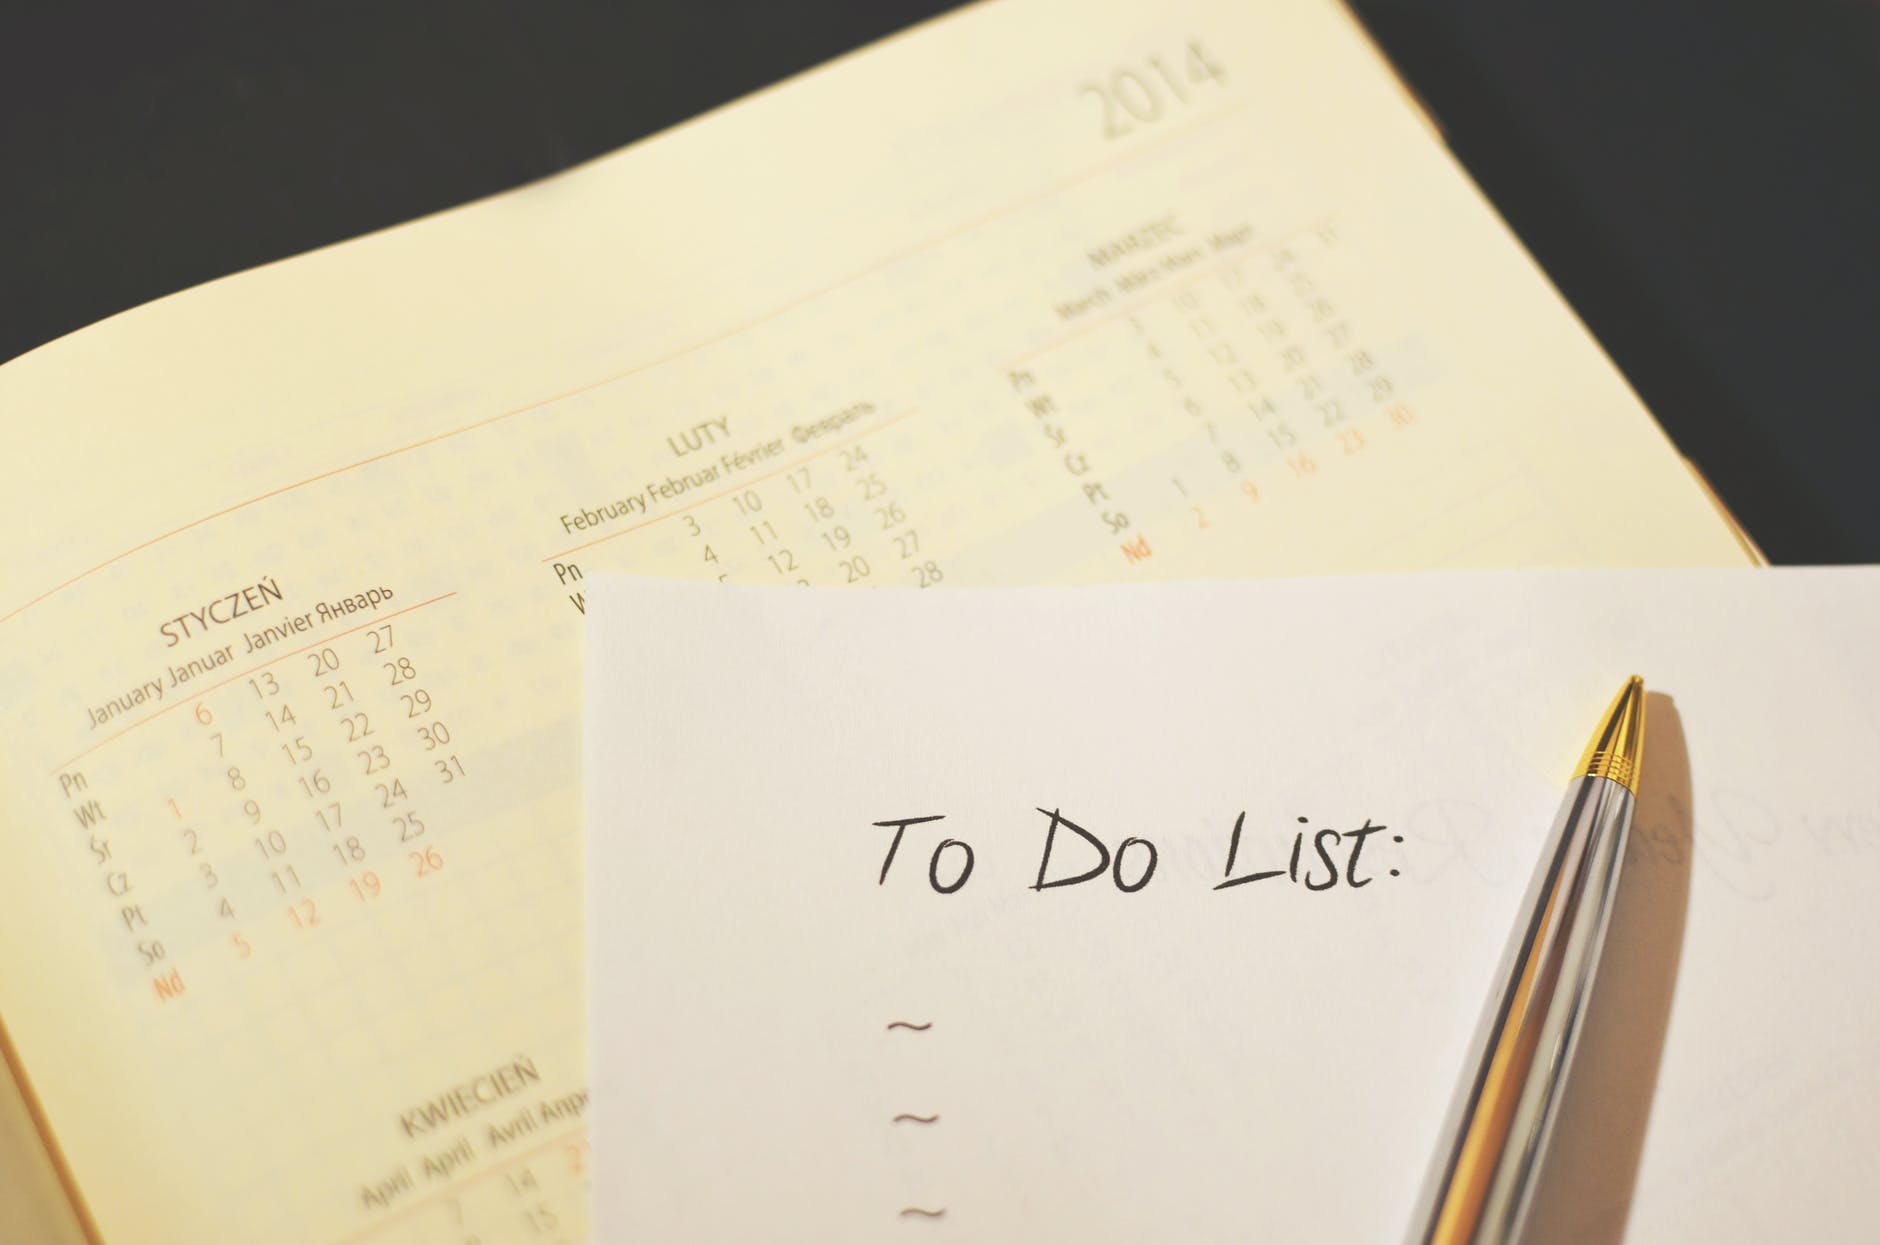 Maintaining your to-do lists